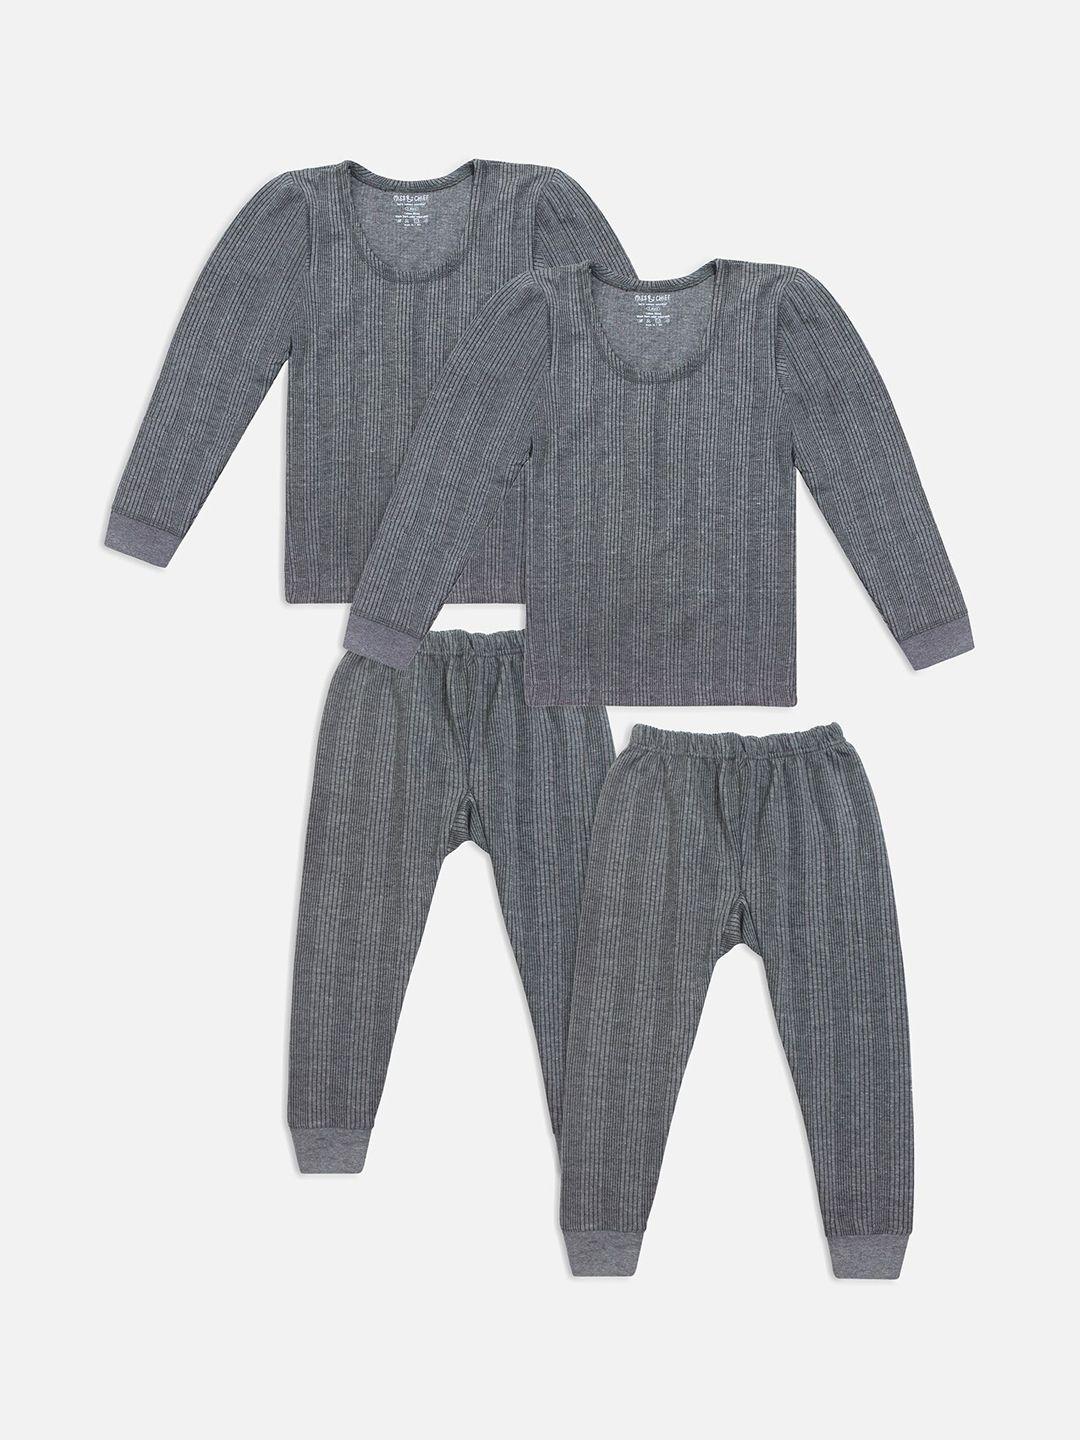 miss & chief kids grey pack of 2 ribbed thermal set